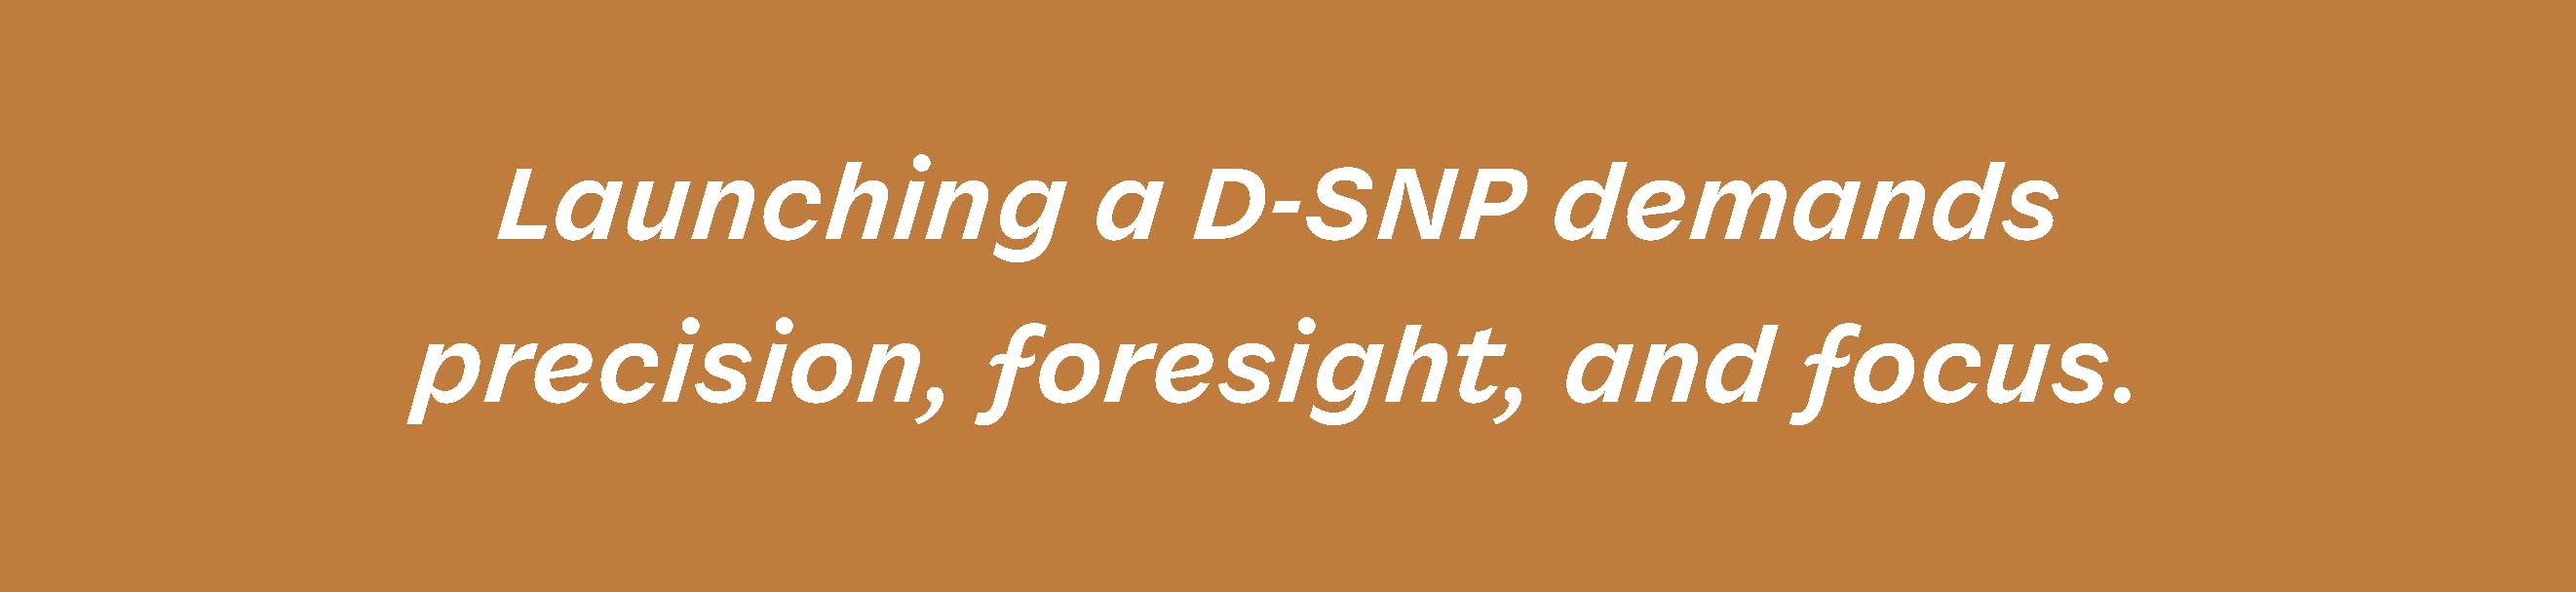 Launching a D-SNP demands precision, foresight, and focus.